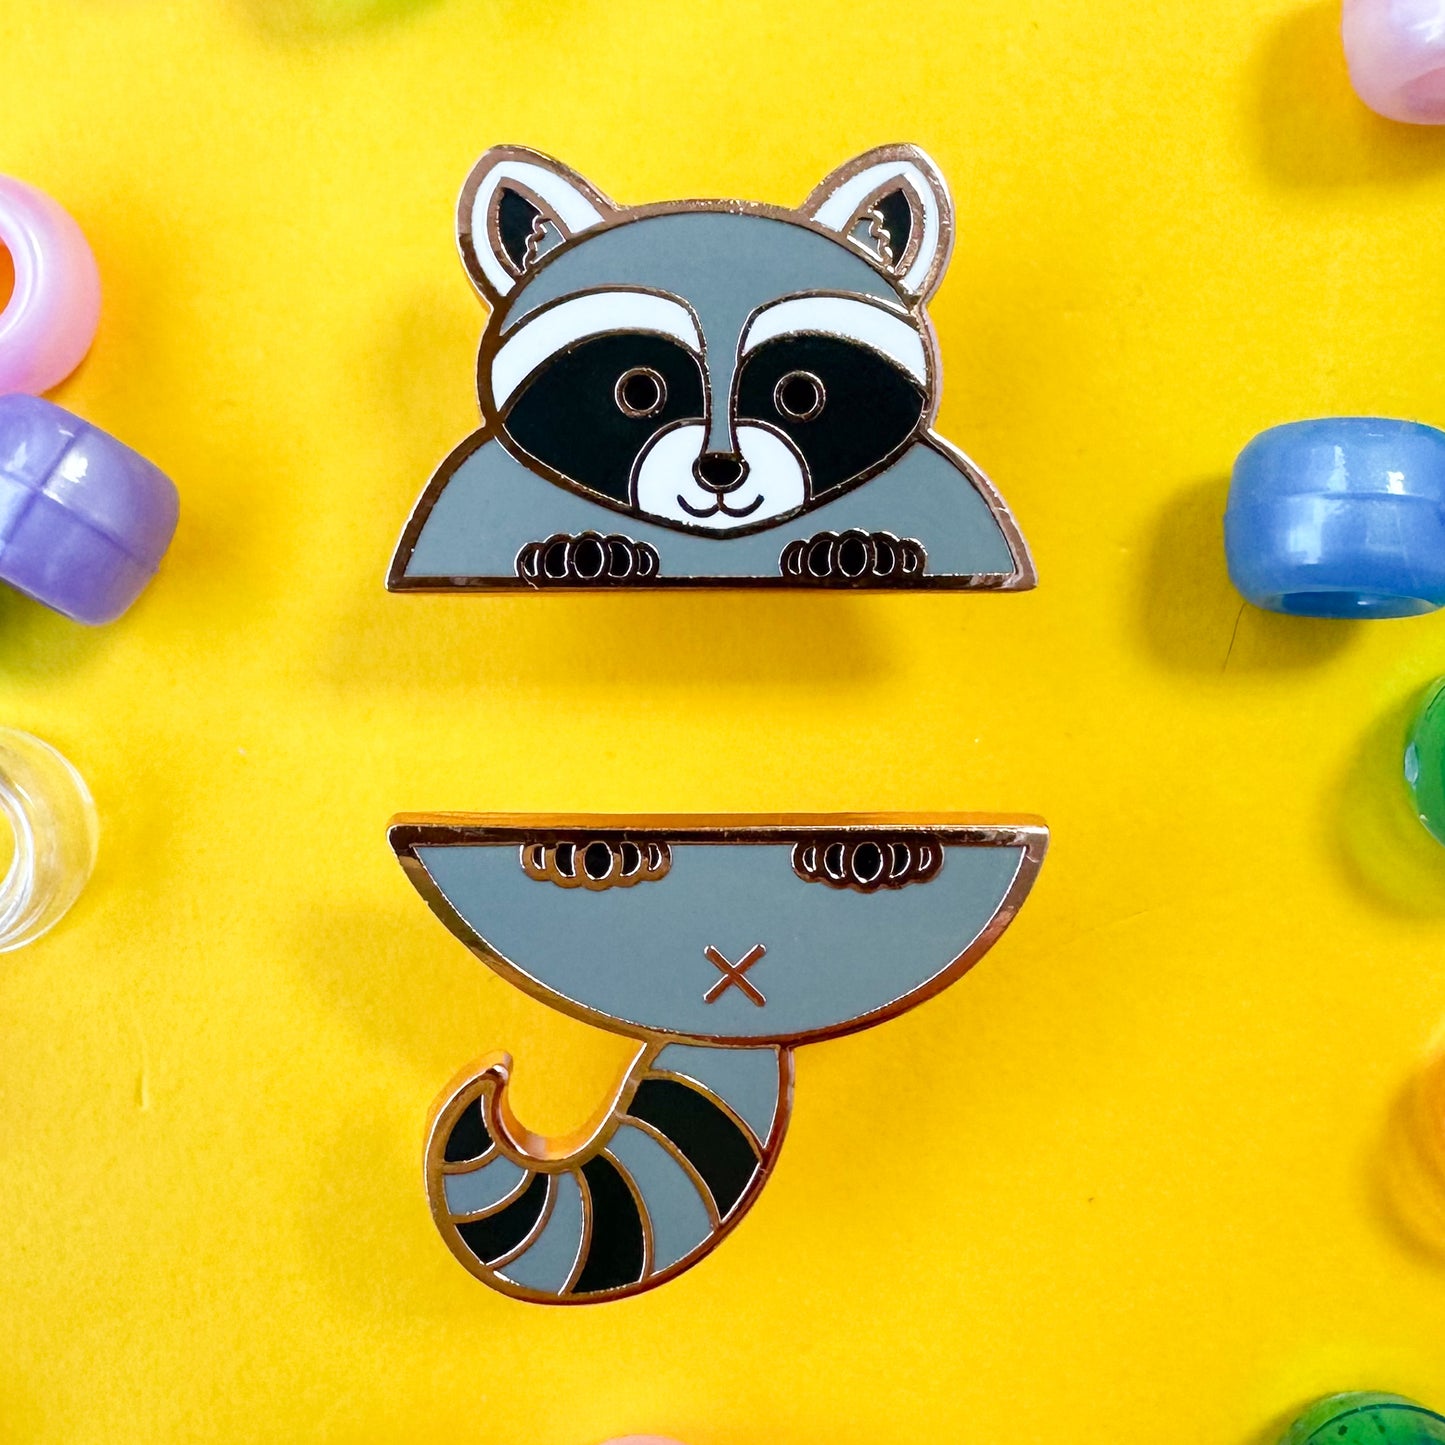 Two enamel pins that form a cute raccoon illustration, the pins are on a yellow background with pony beads scattered around it.